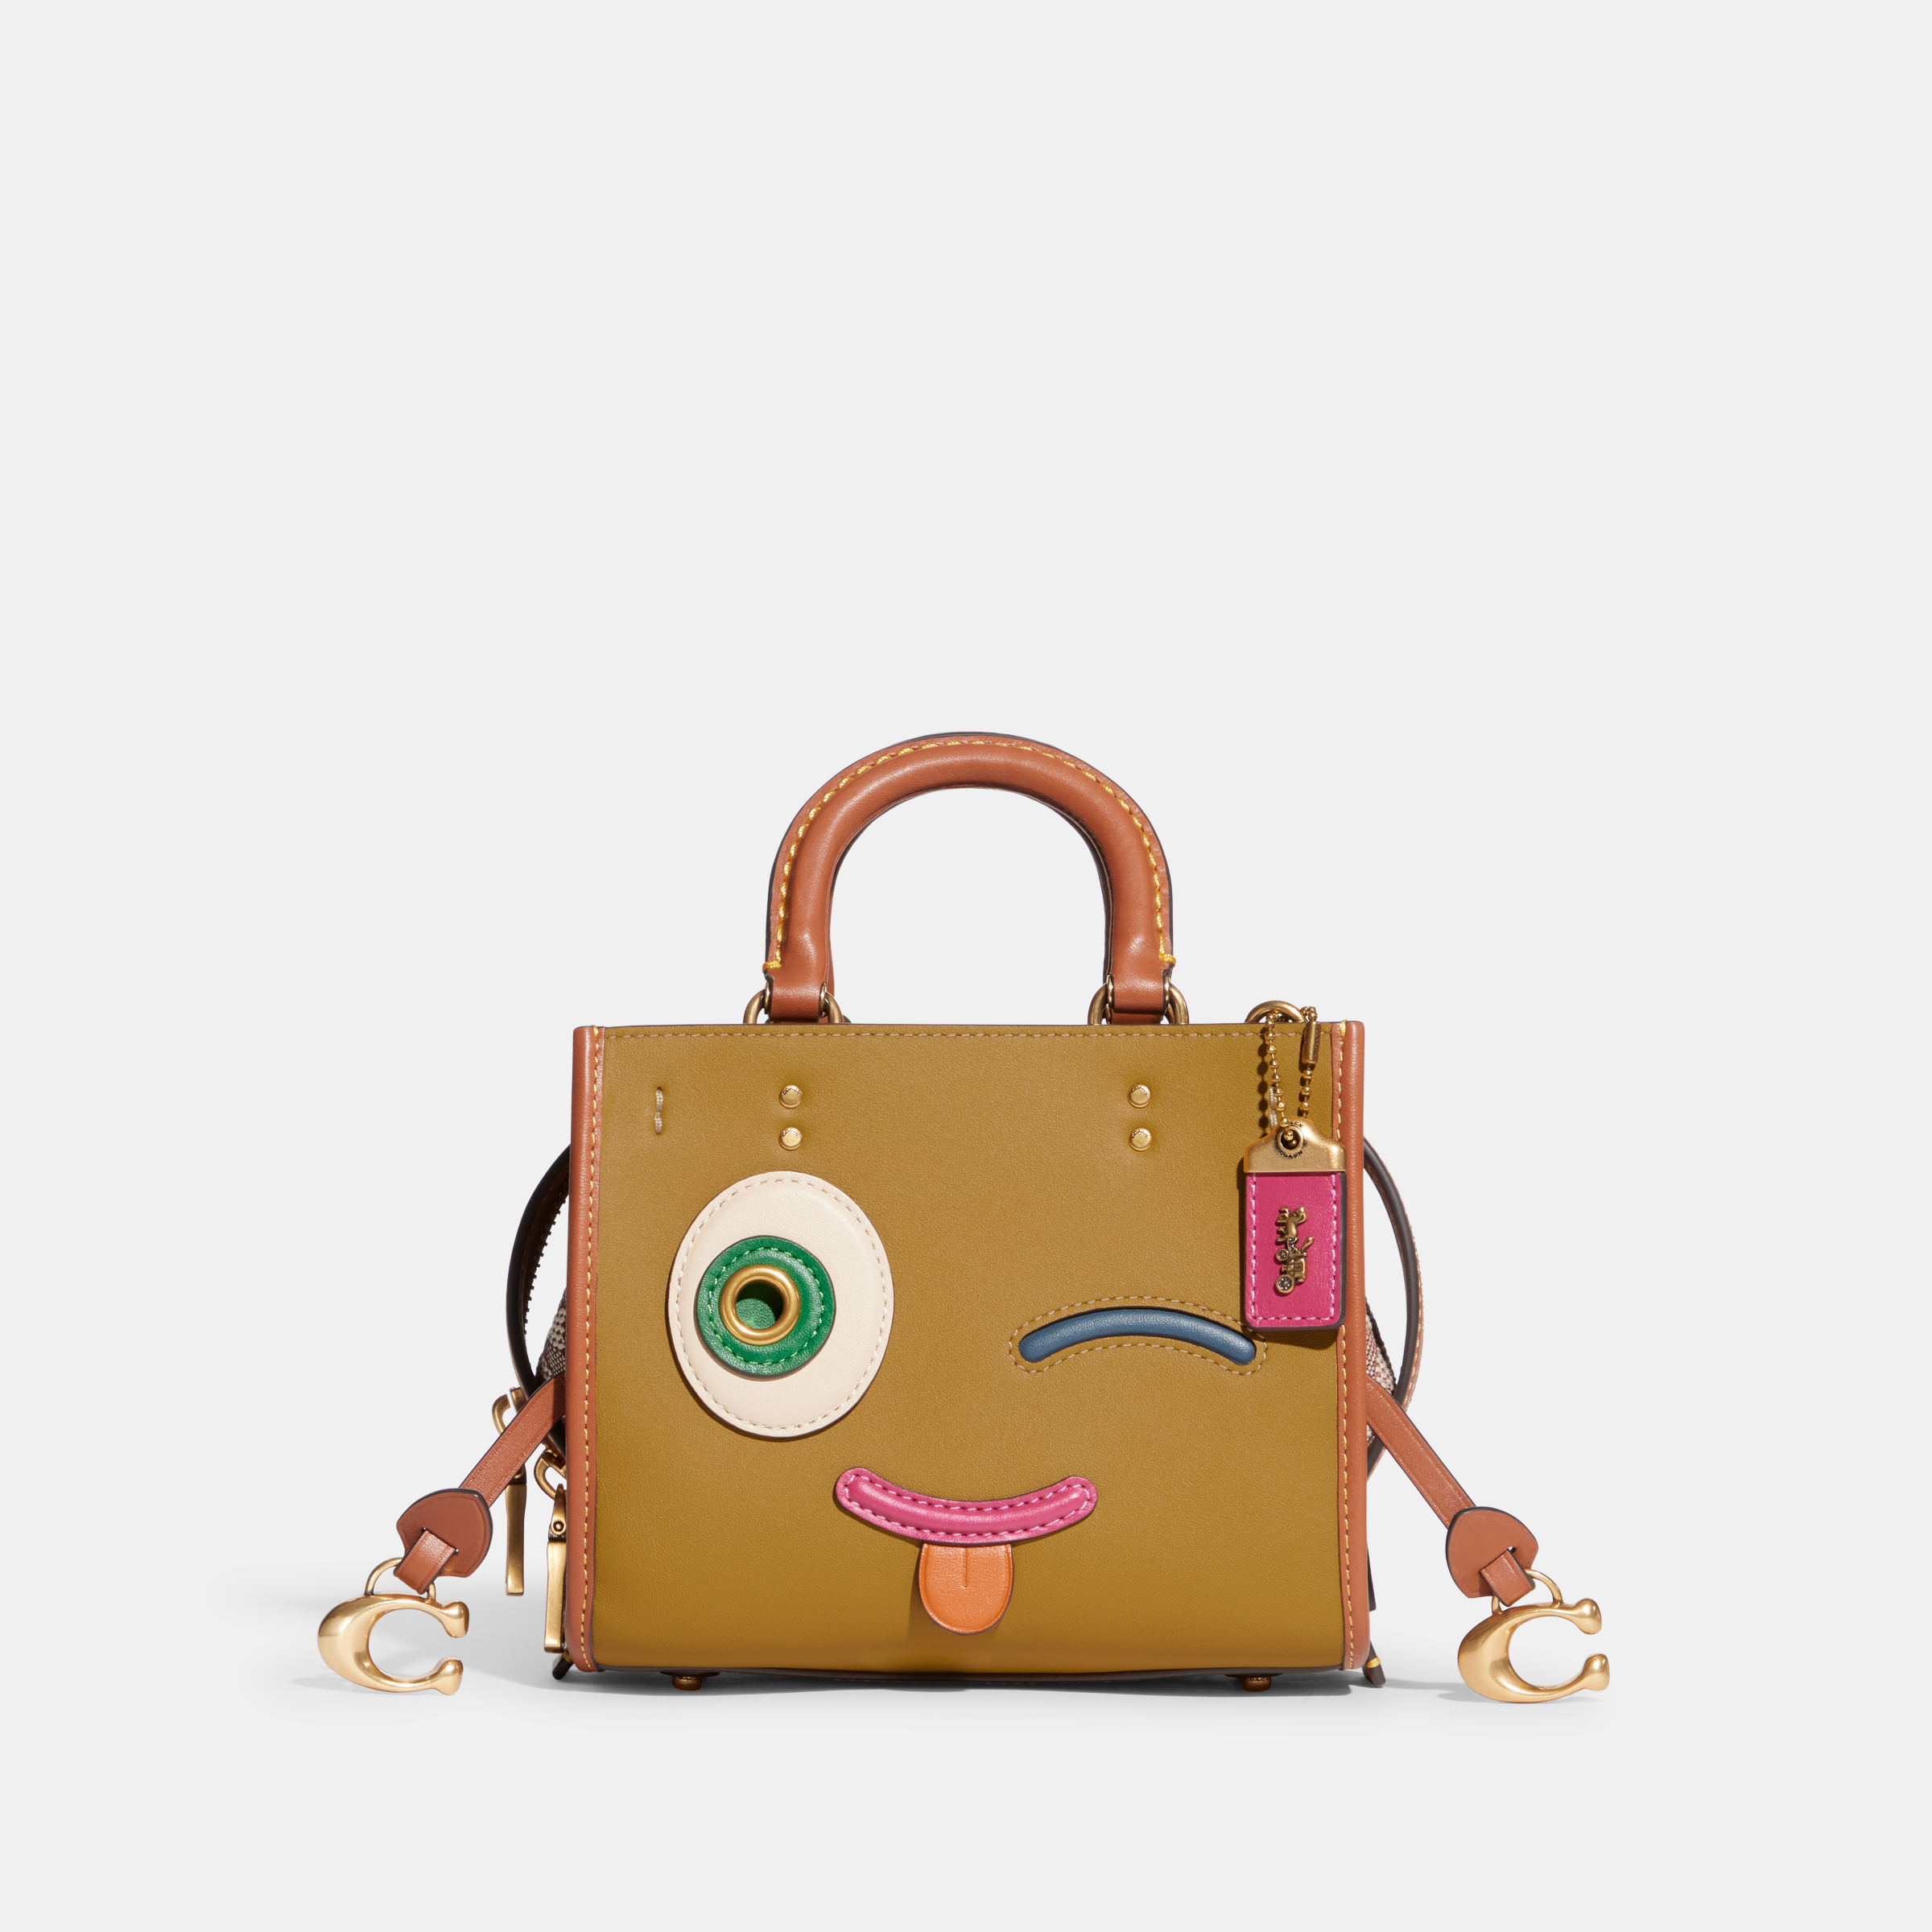 The Coach 'Coachies' Collection Sees Fun Personalities On Leather Bags And  Card Cases